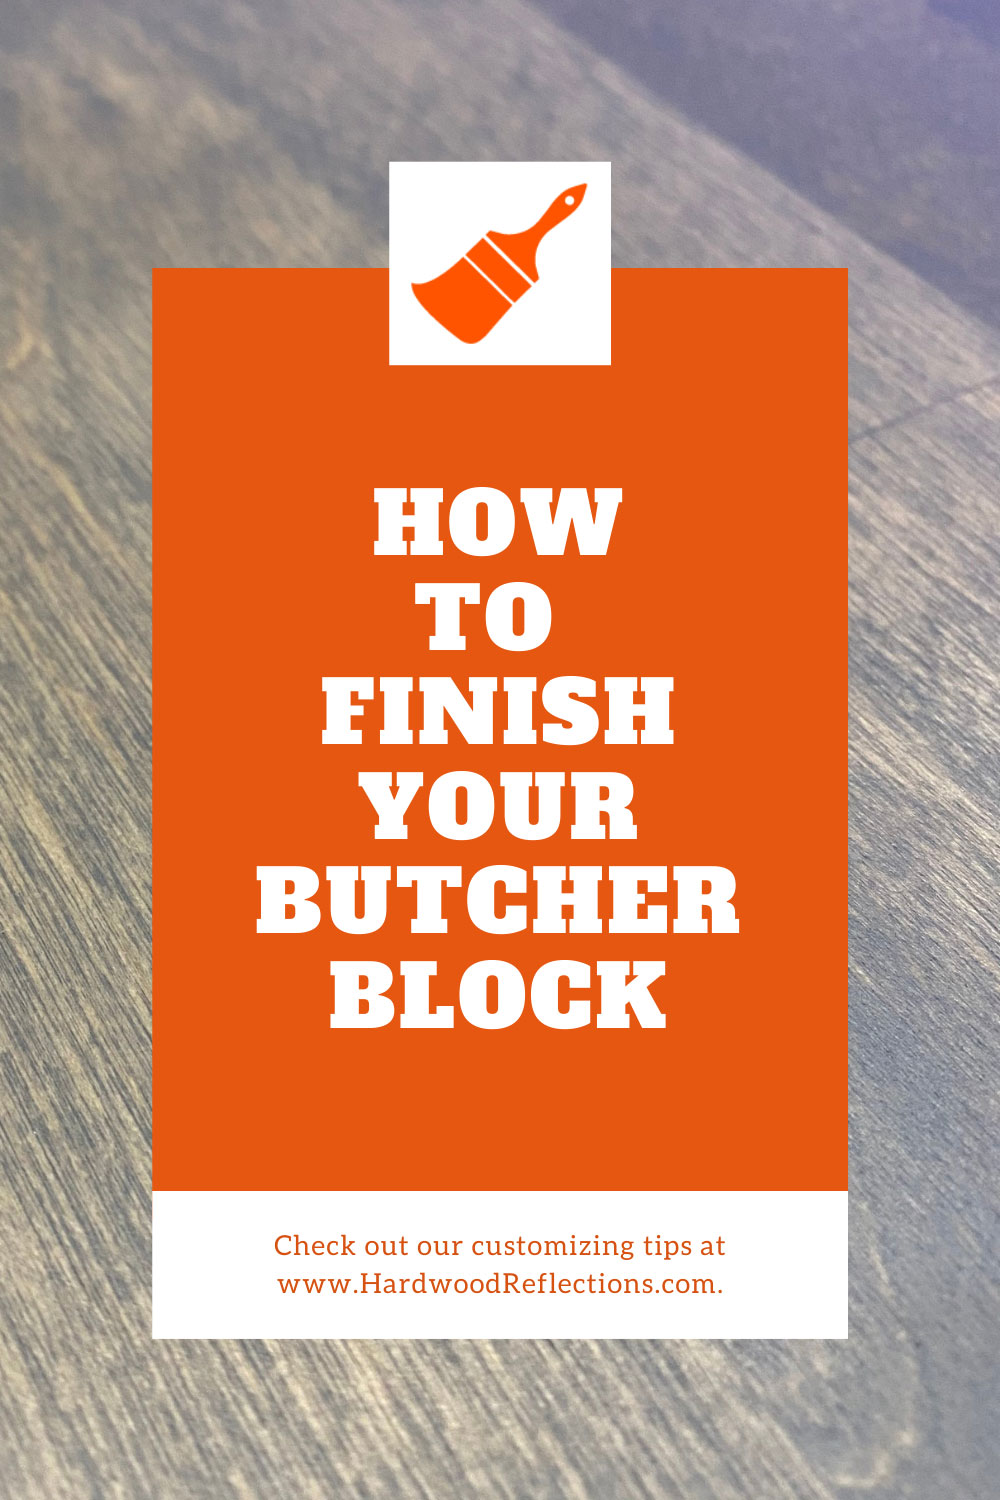 How to Finish your Butcher Block